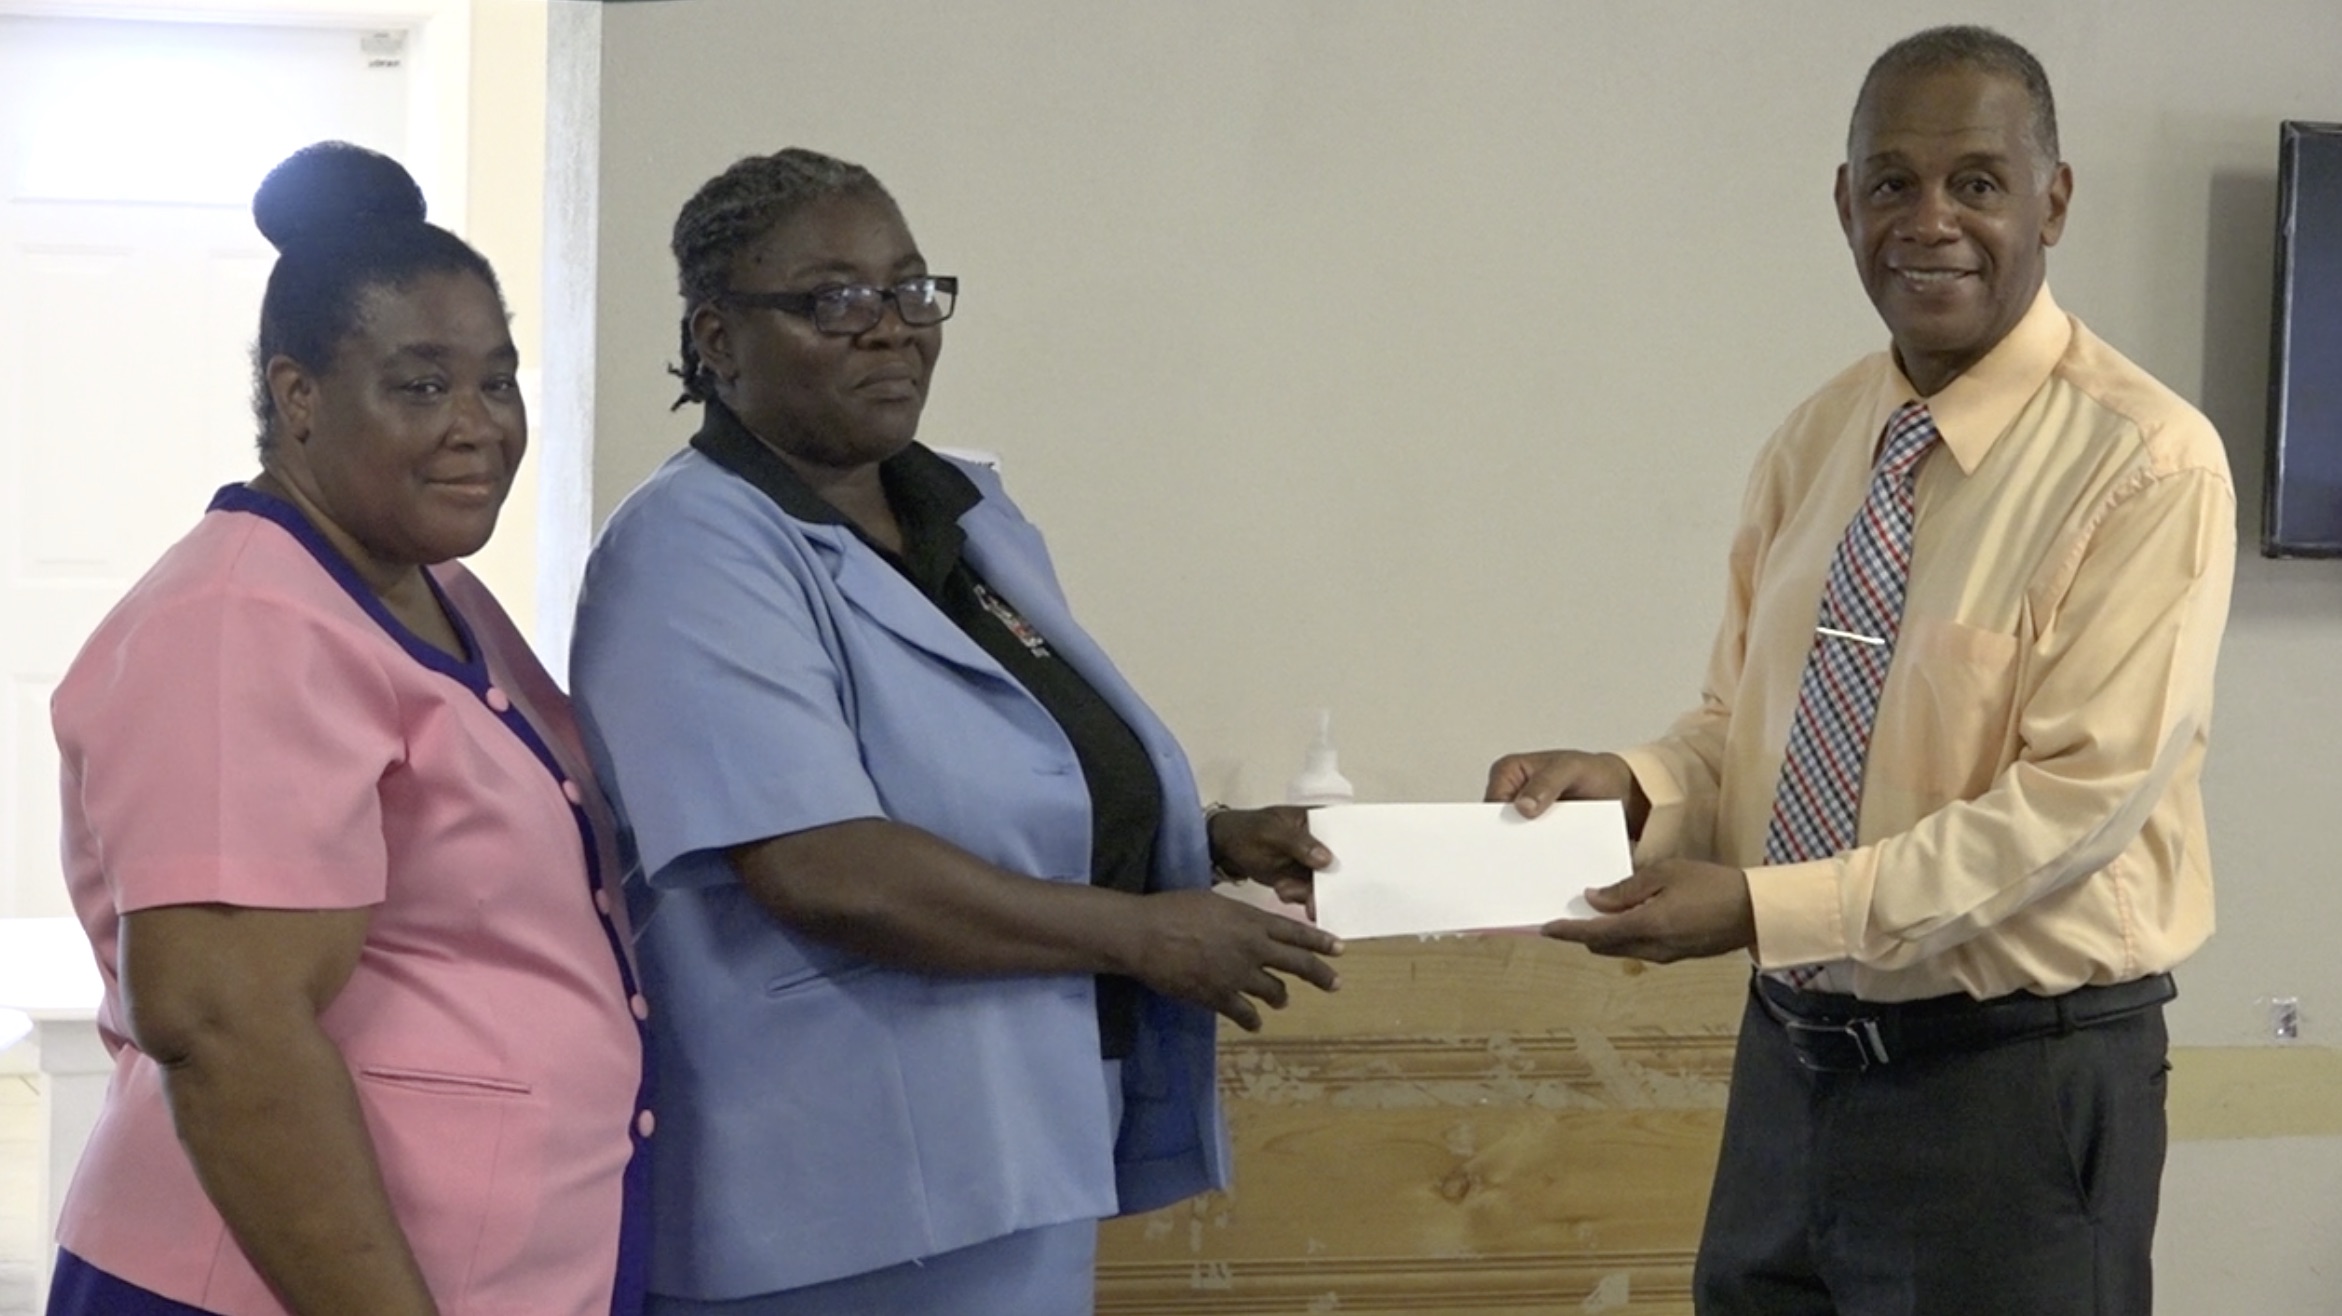 Hon. Eric Evelyn, Minister of Youth, Community Development, and Area Representative for St. George’s Gingerland presenting a financial donation to Ms. Dawnny Lanns, Education Officer responsible for the Gingerland Preschool on behalf of the school on October 09, 2020. Ms. Pamela Elliott, Supervisor of the Gingerland Preschool looks on